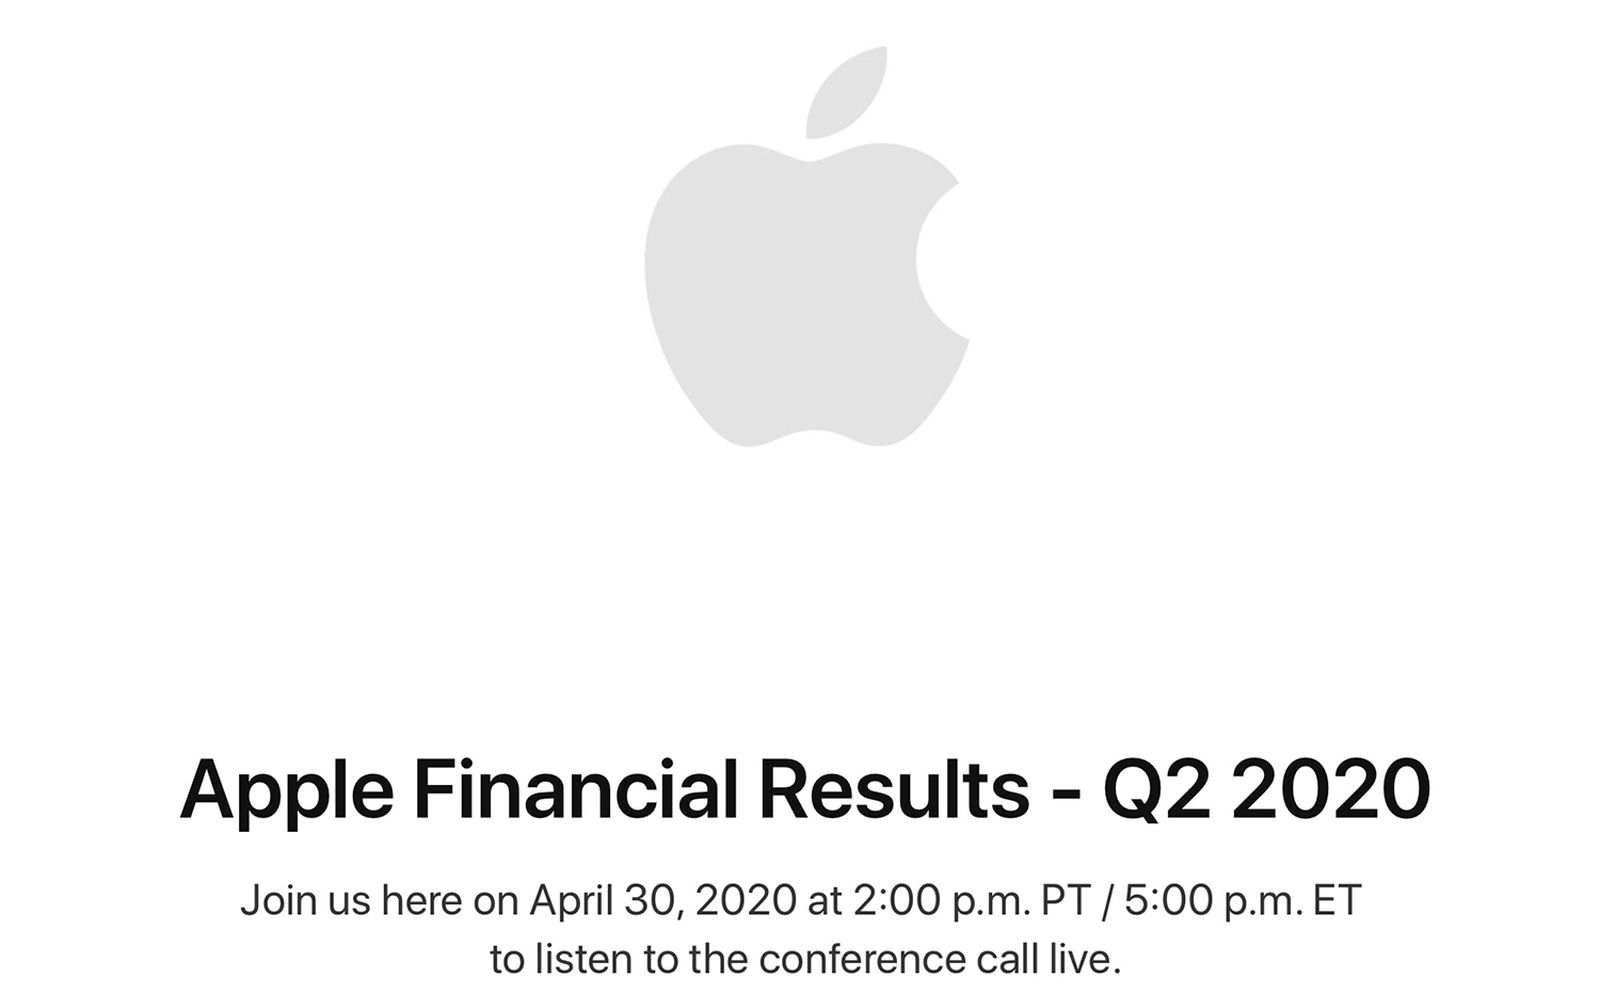 Apple to Announce Q2 2020 Earnings on April 30 MacRumors